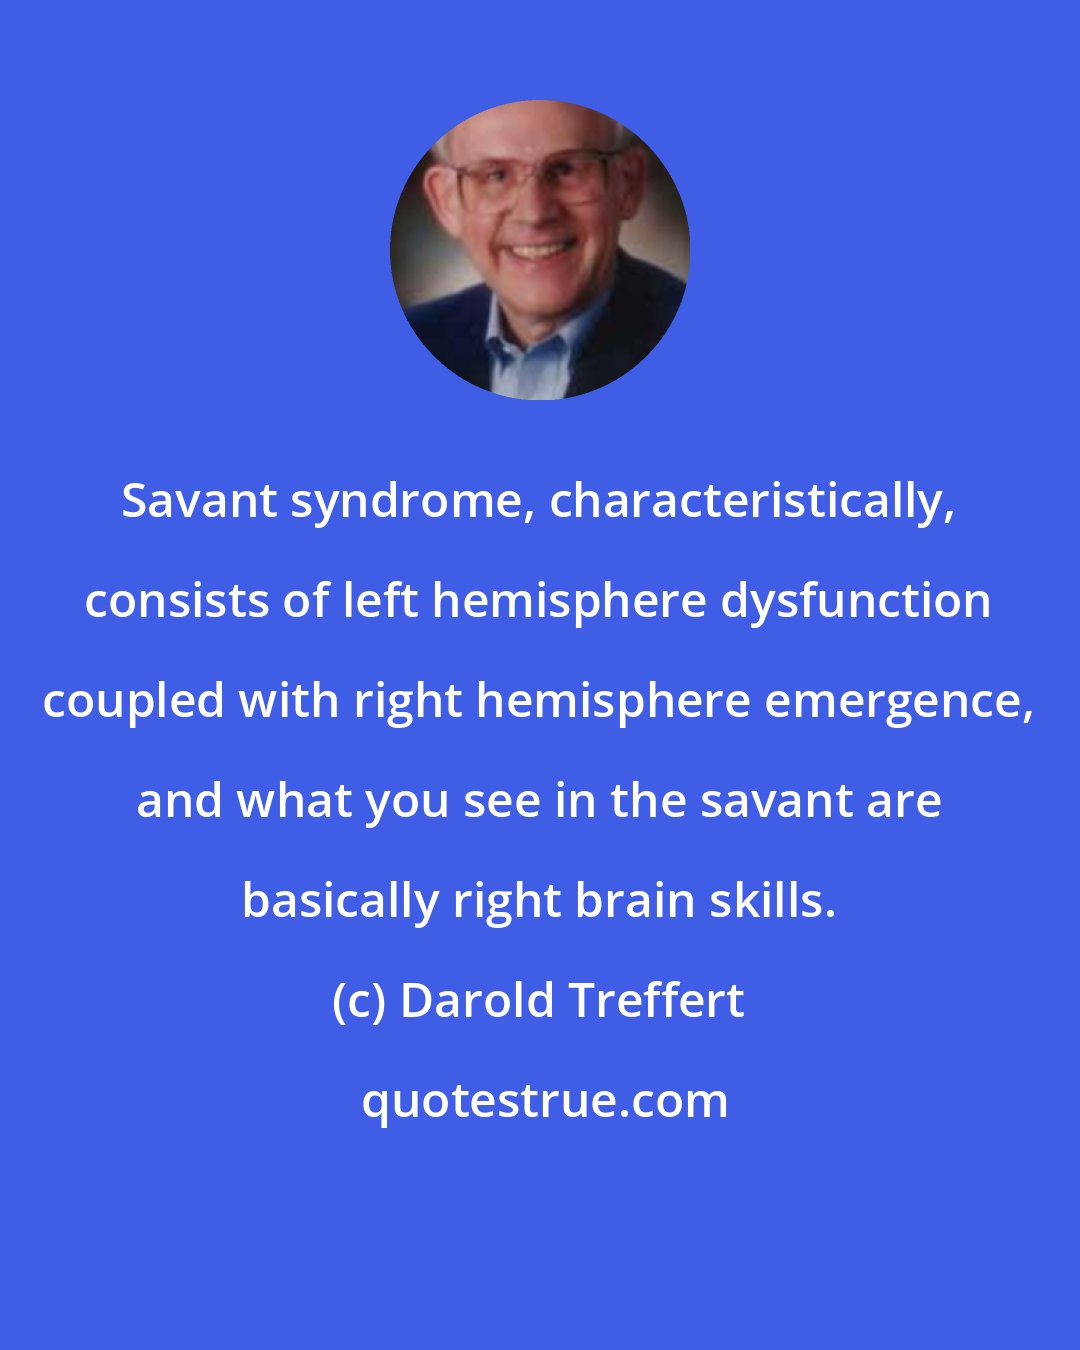 Darold Treffert: Savant syndrome, characteristically, consists of left hemisphere dysfunction coupled with right hemisphere emergence, and what you see in the savant are basically right brain skills.